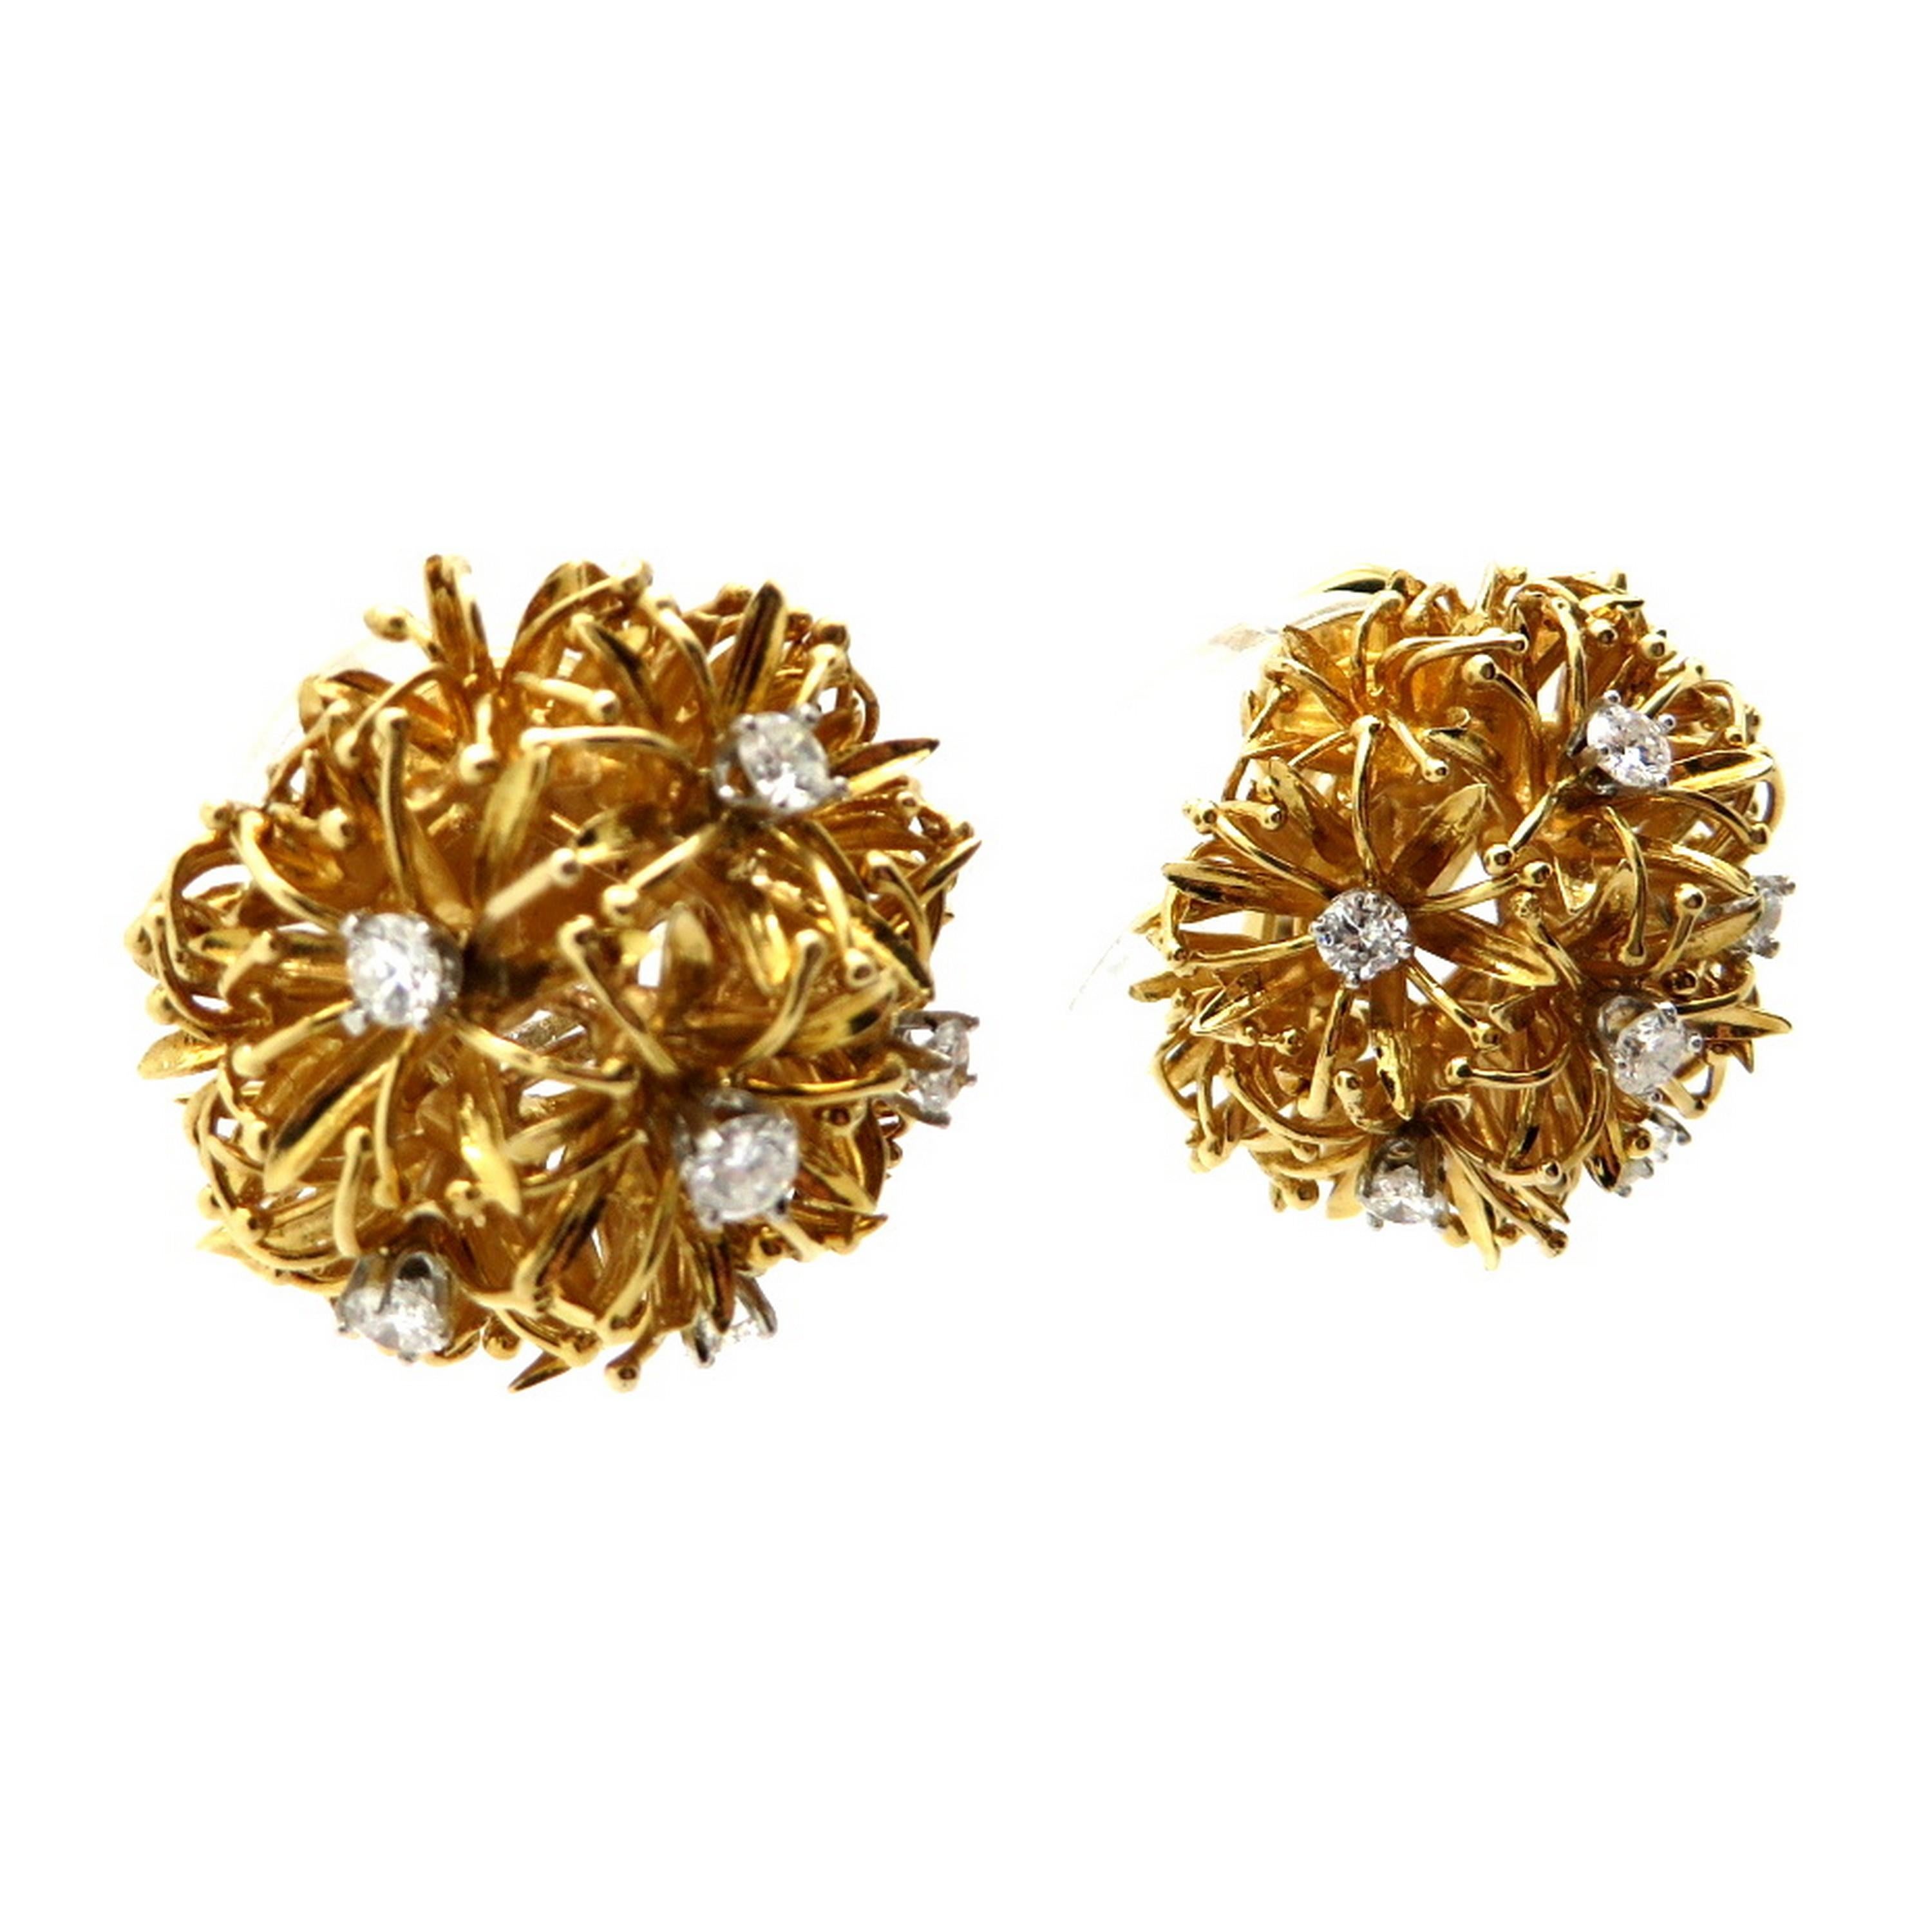 Estate designer David Webb 18K and platinum dandelion diamond earrings. Showcasing 12 round brilliant cut prong set diamonds weighing a combined total of approximately 1.30 carats. Diamond grading: color grade: F. Clarity grade: VS1. The earrings